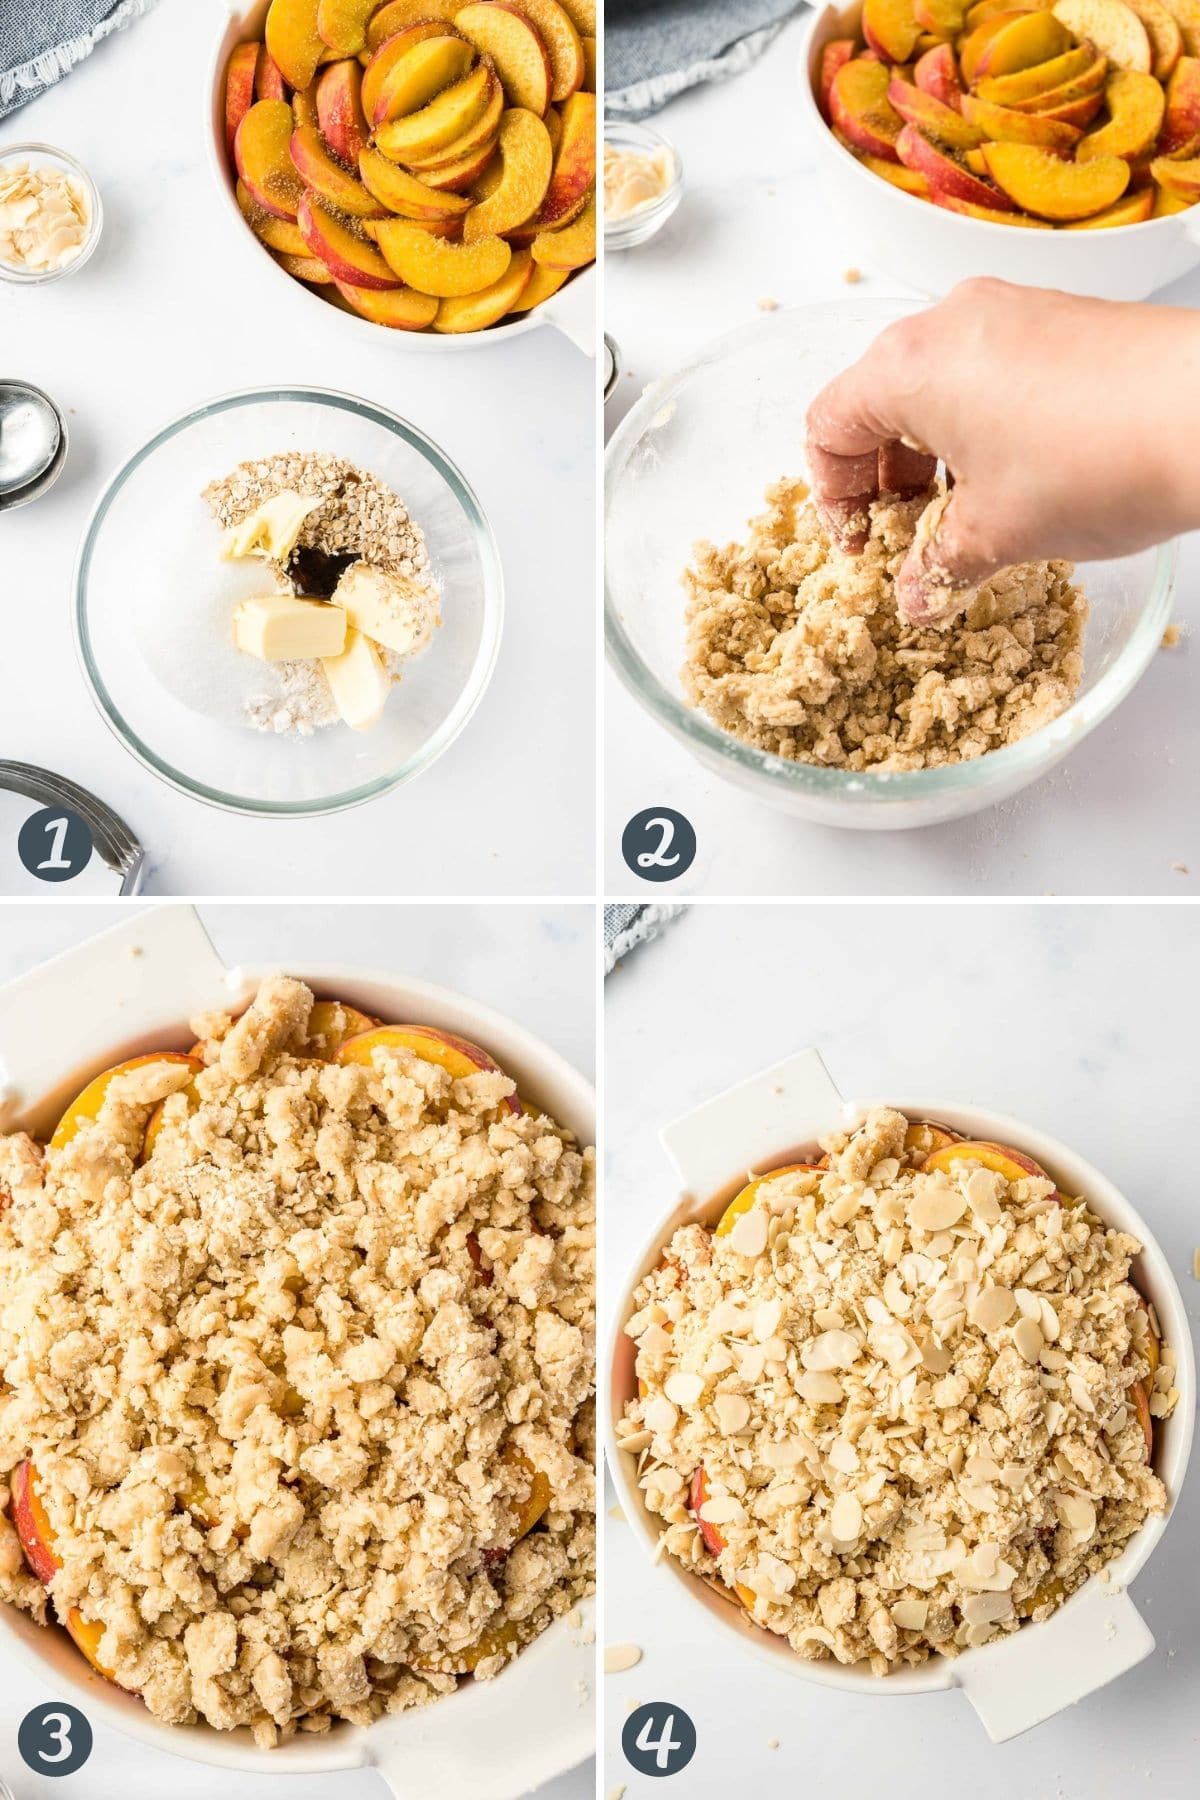 Steps for making a peach crisp in the Air Fryer